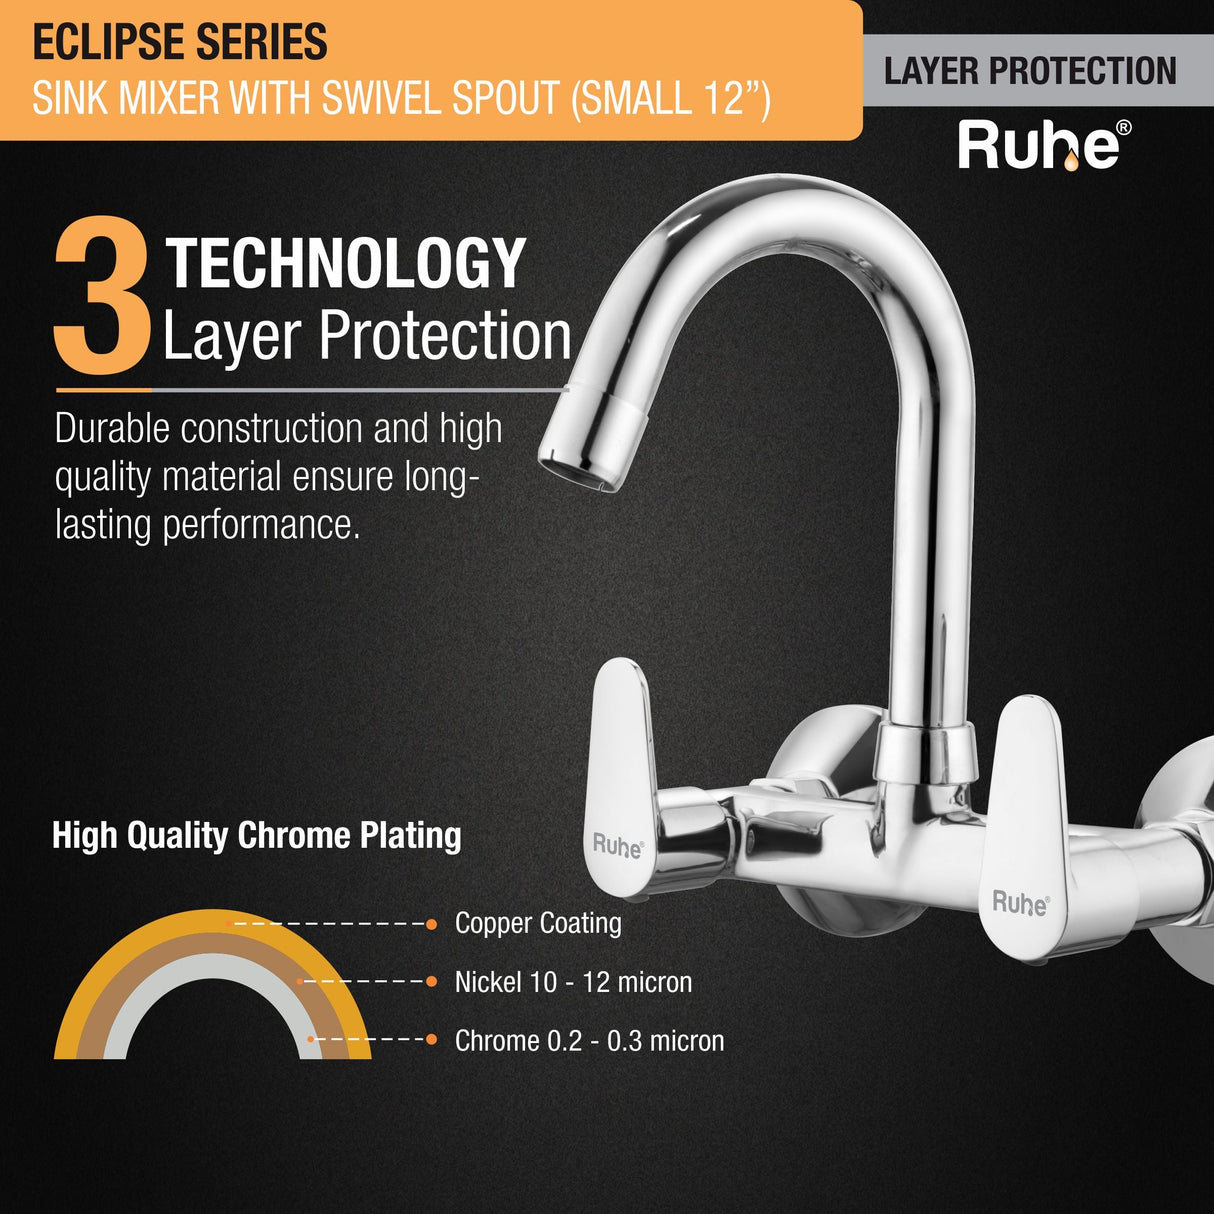 Eclipse Sink Mixer with Small (12 inches) Round Swivel Spout Faucet 3 layer protection